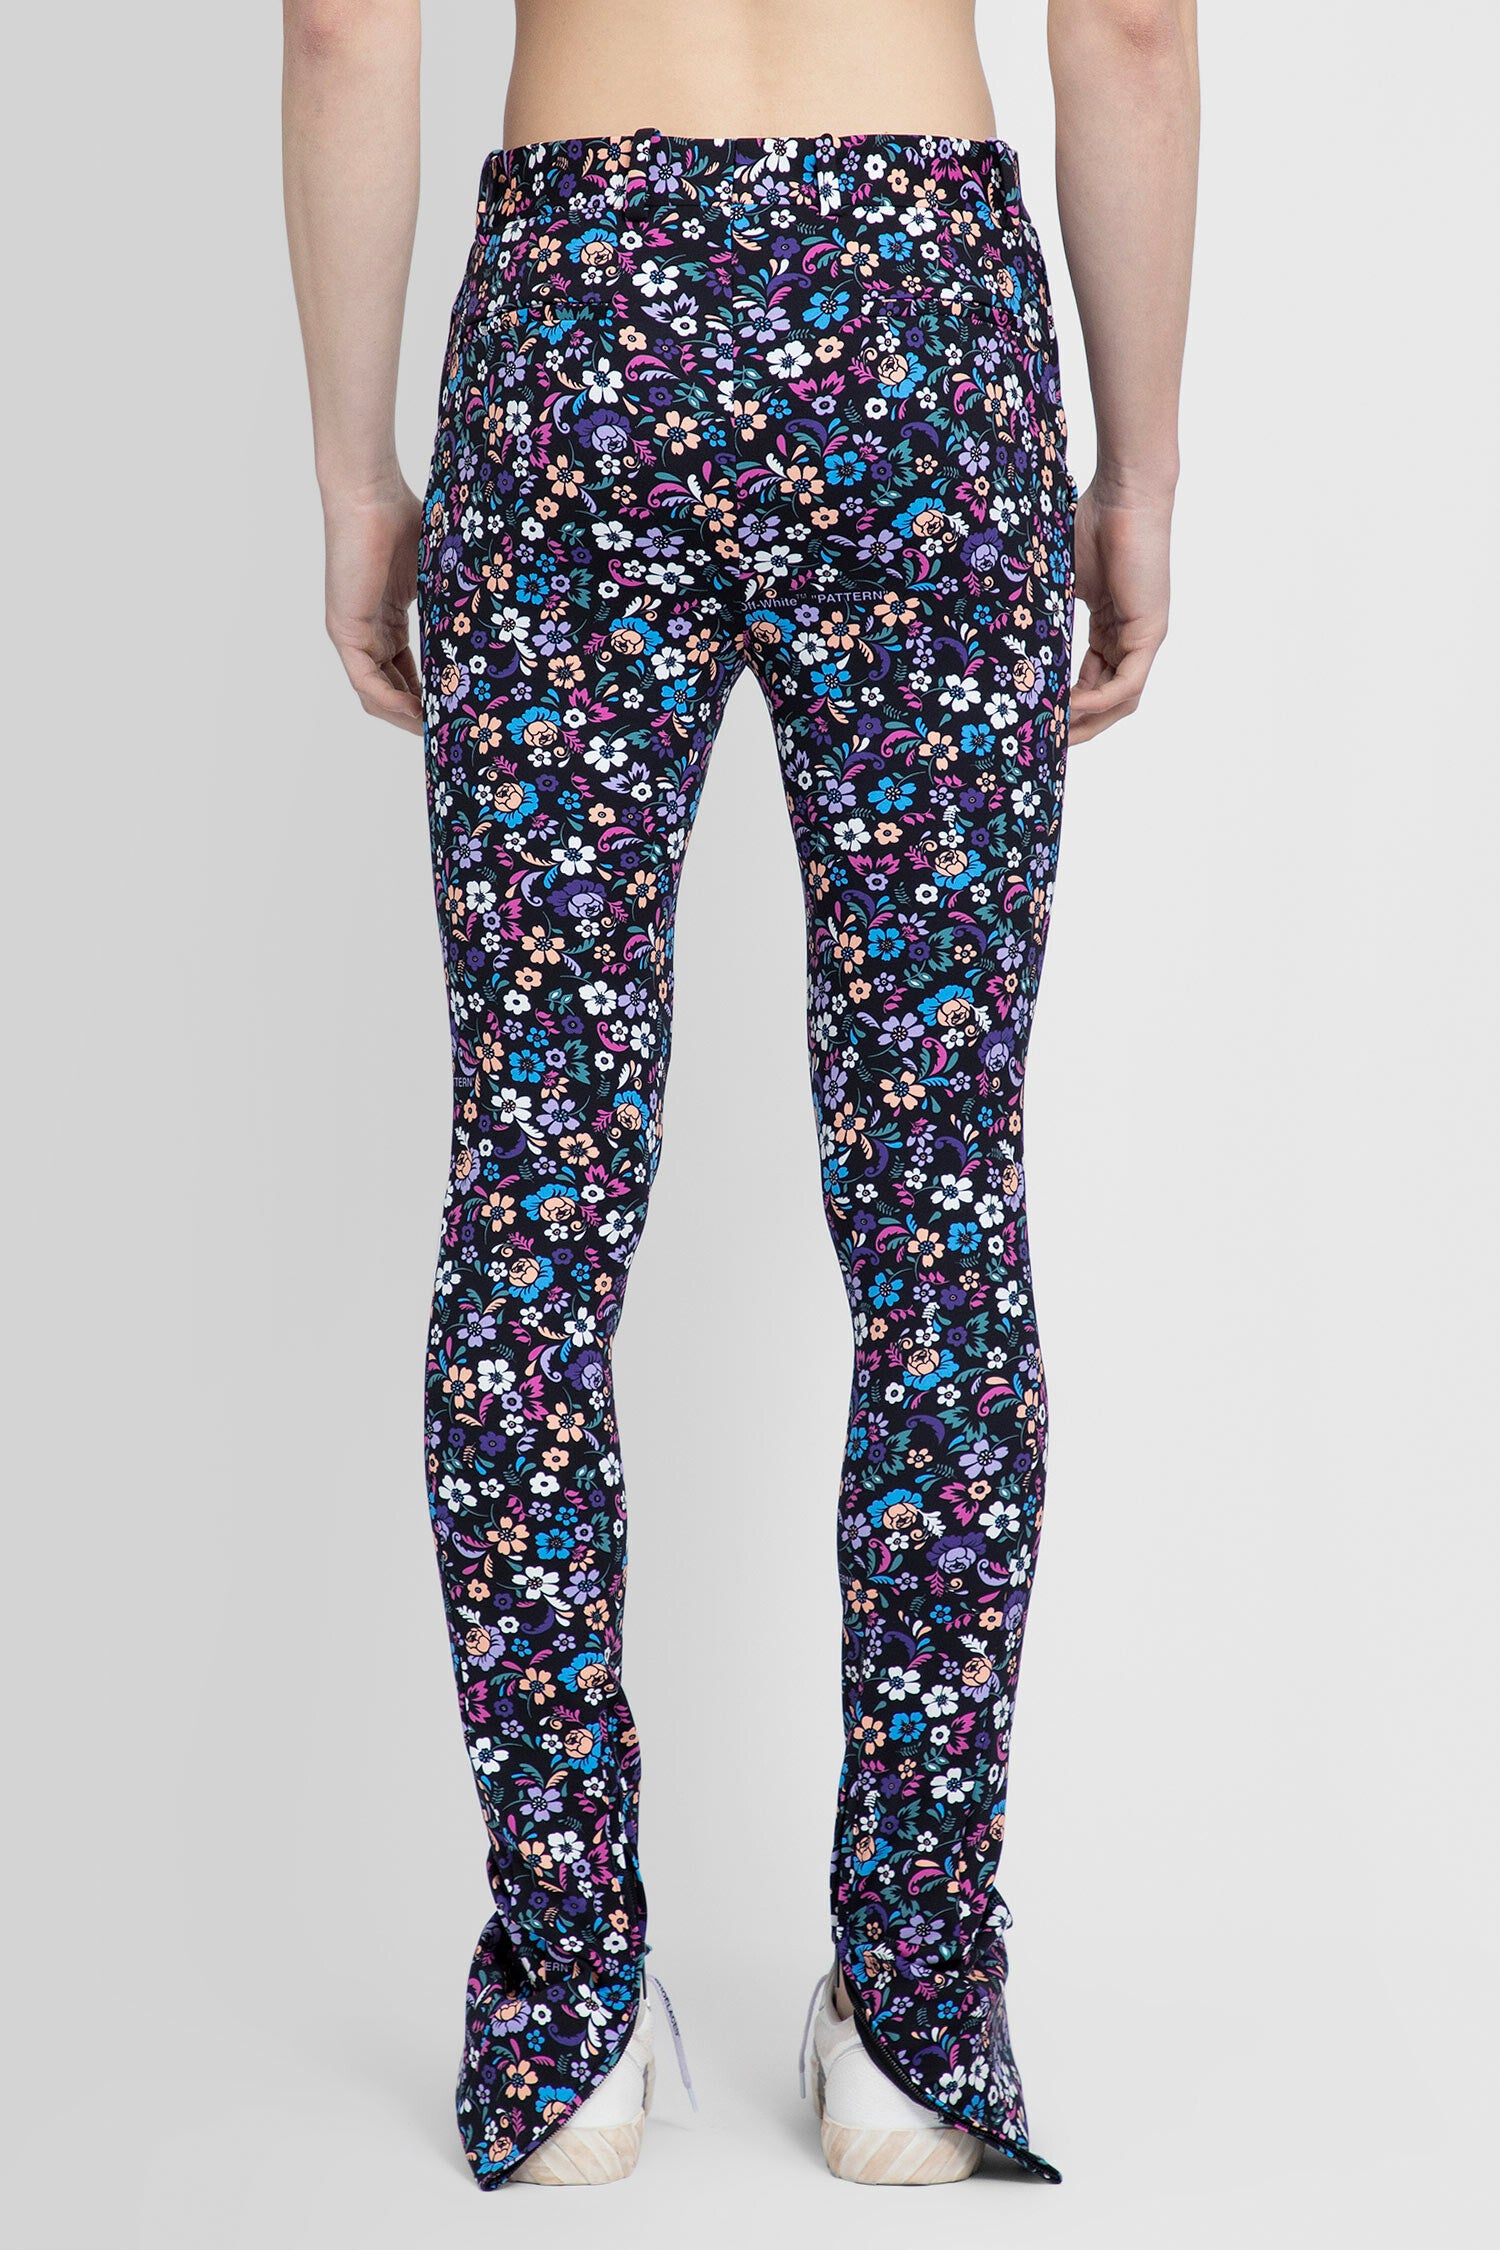 OFF-WHITE MAN MULTICOLOR TROUSERS